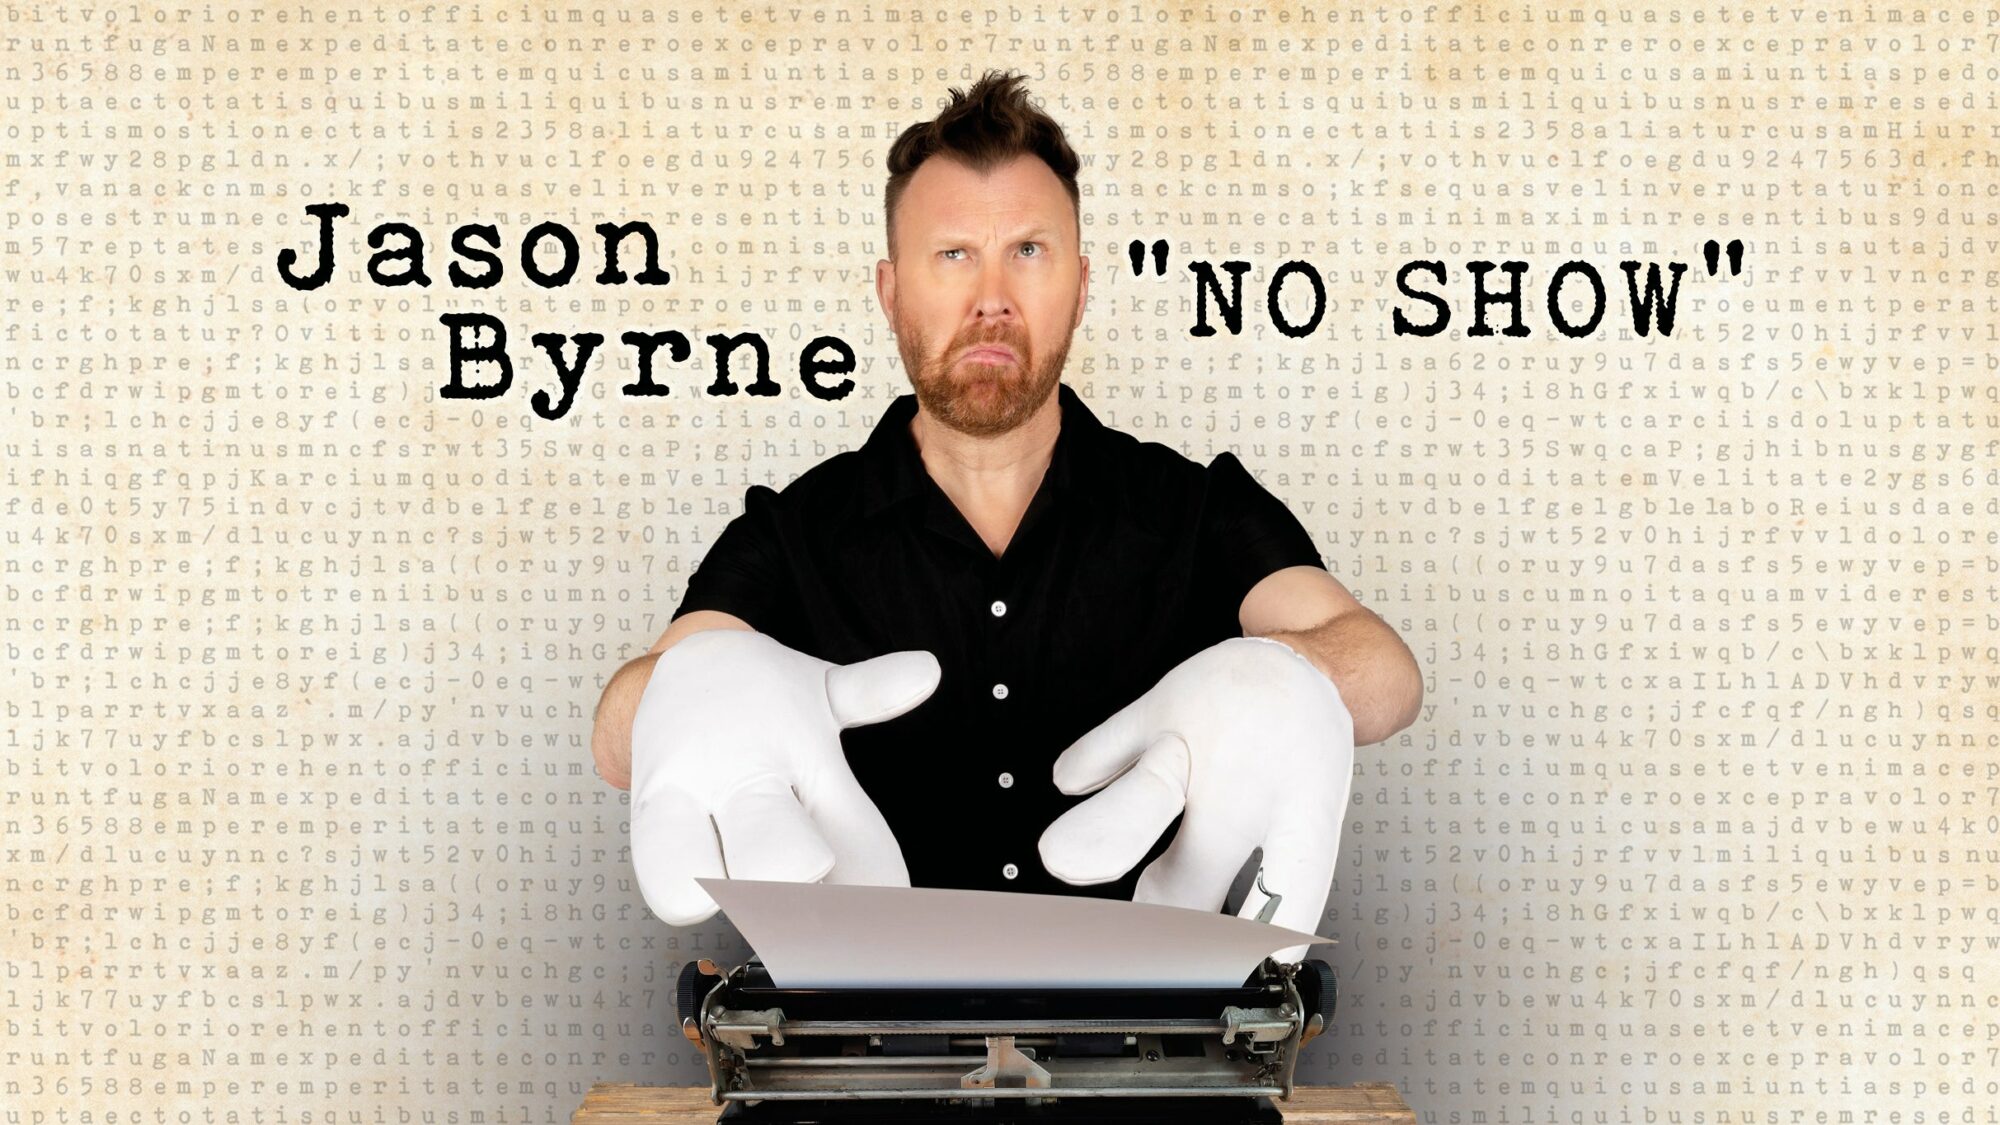 Image name Jason Byrne No Show at Lawrence Batley Theatre Huddersfield the 29 image from the post Jason Byrne: No Show at ARC Stockton Arts Centre, Stockton on Tees in Yorkshire.com.